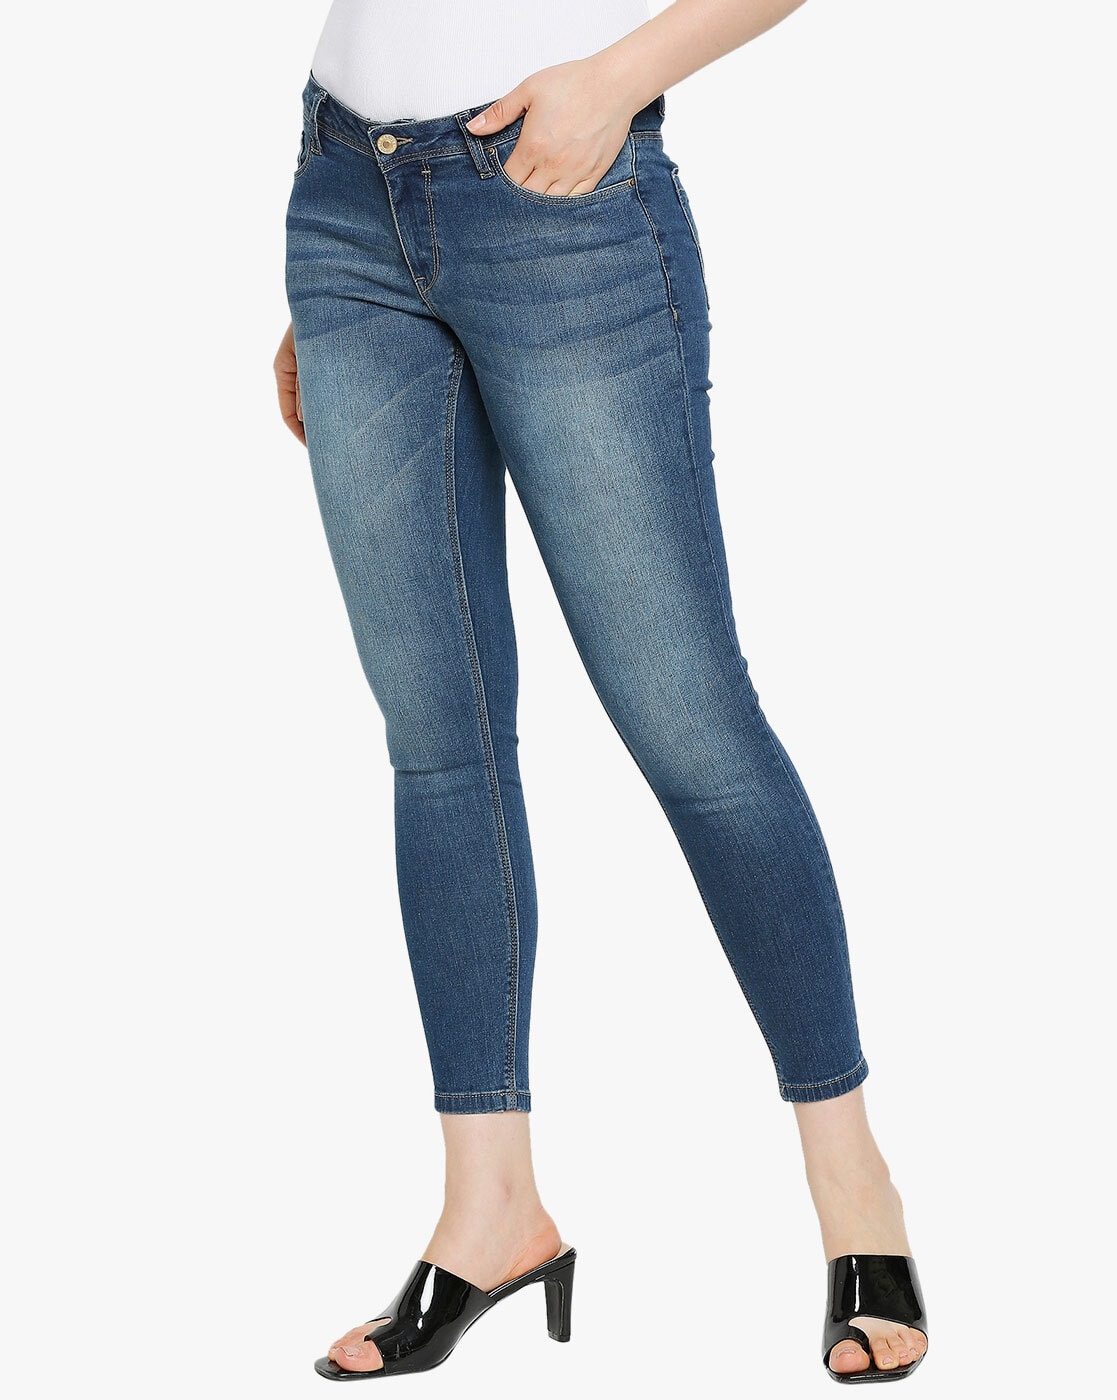 Buy SRW Jeans for Women Jeans for Women Under 500 | Jeans for Women  Stretchable | Jeans for Women Slim Black at Amazon.in